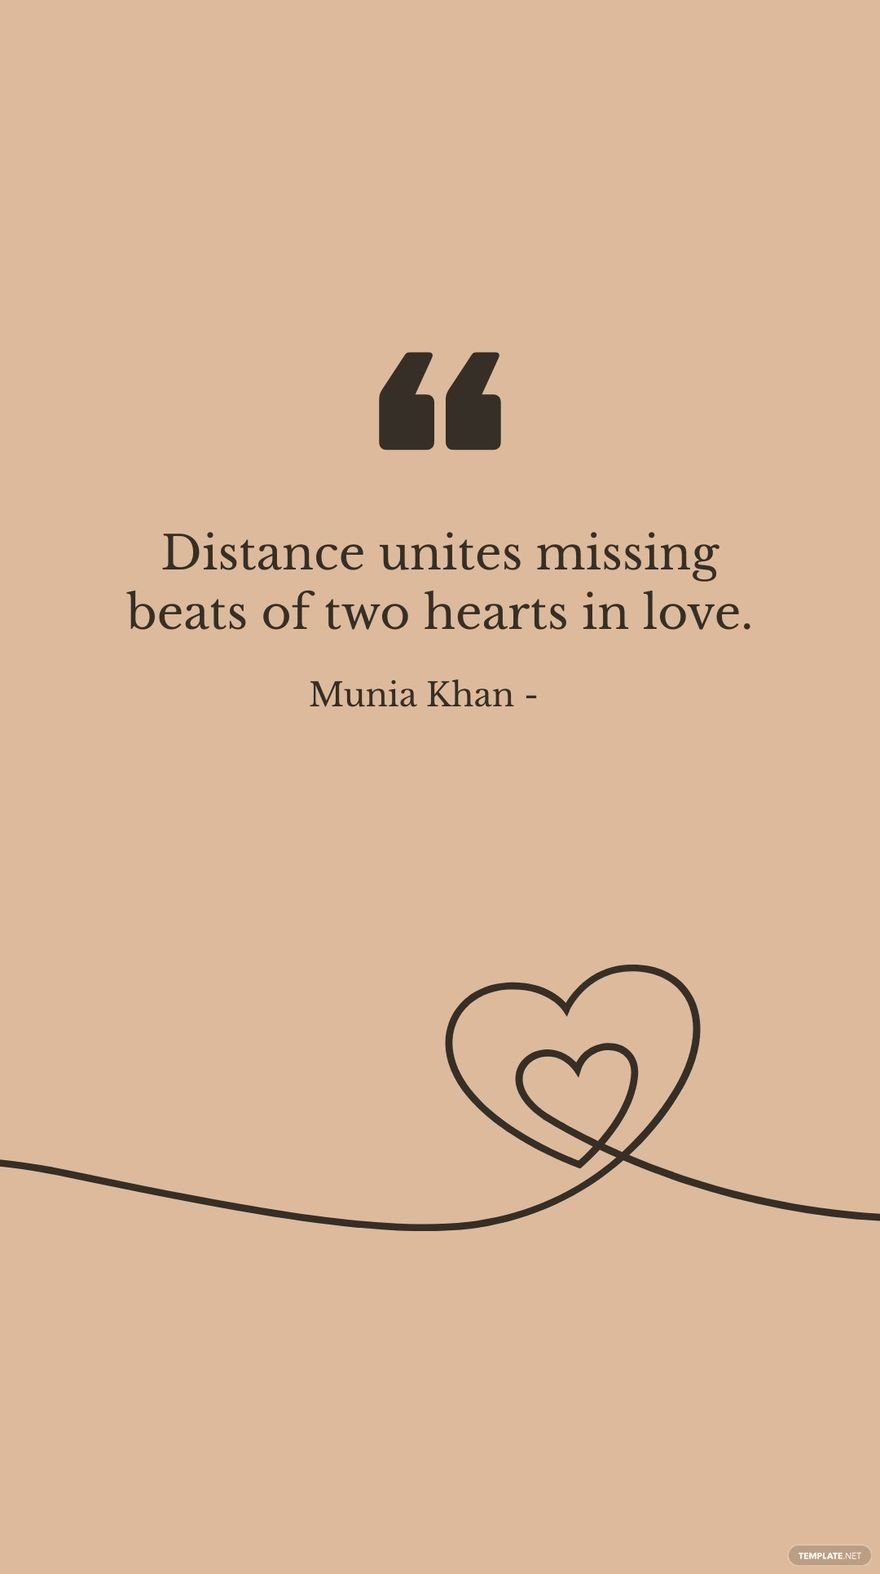 Free Munia Khan - Distance unites missing beats of two hearts in love.